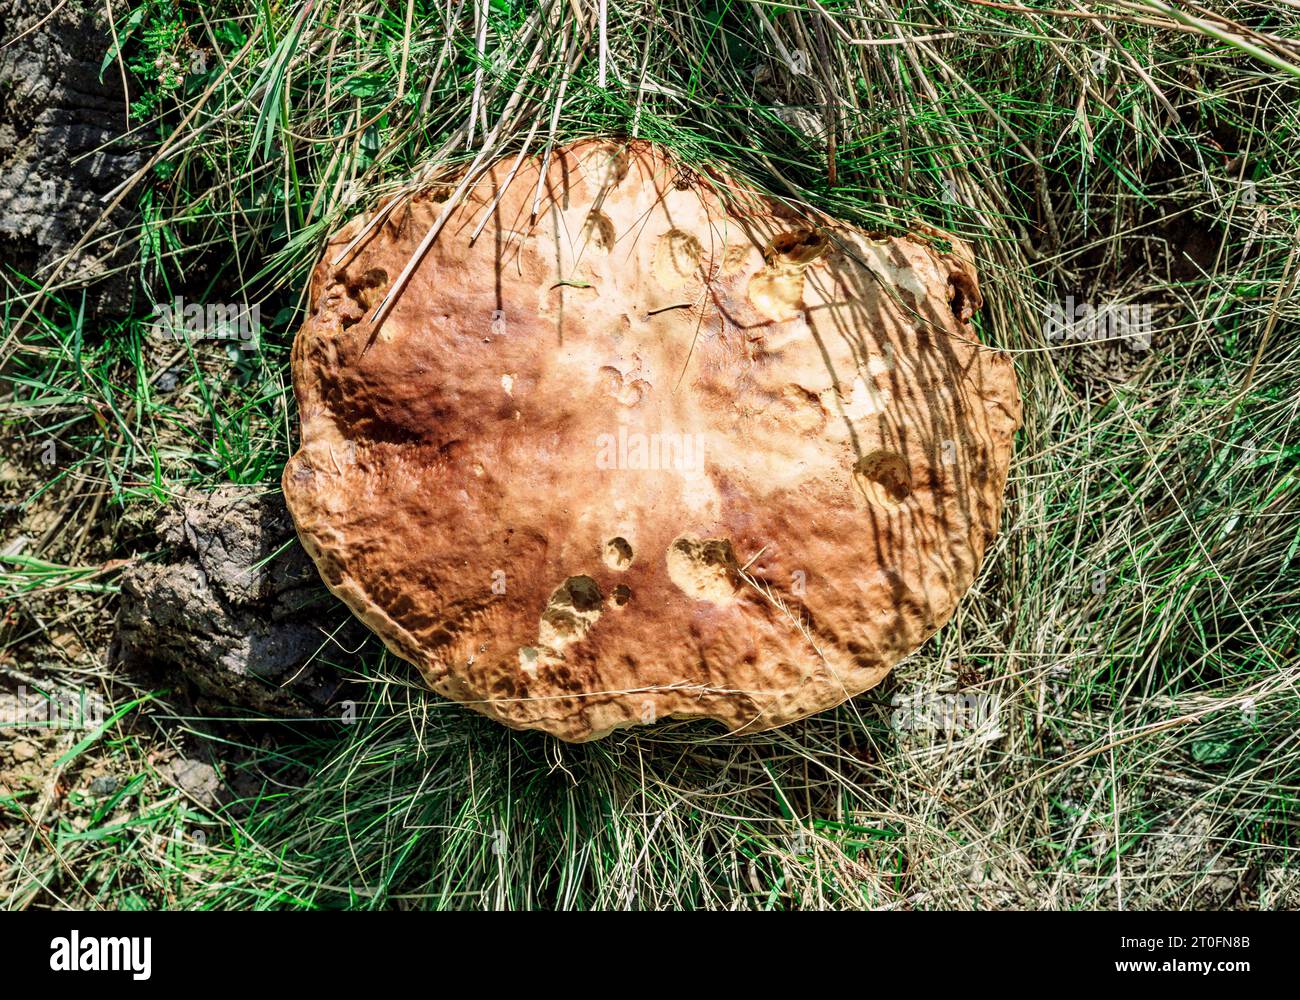 Large porcini mushroom in grass next to cow dung. Top view of fall fungus. Fungi background scenery. Edible mushroom. Known as king mushroom, cep or B Stock Photo